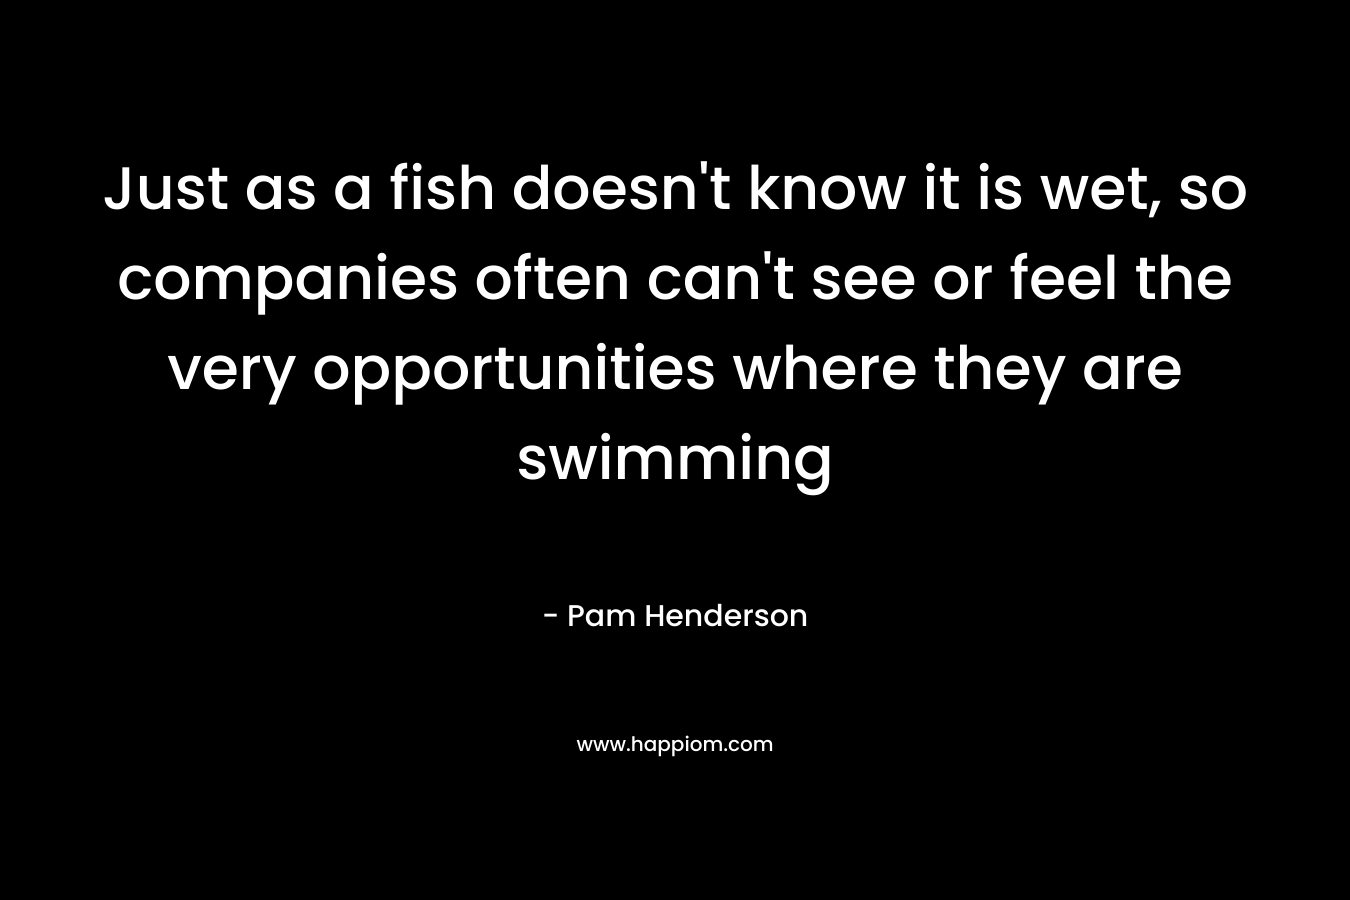 Just as a fish doesn't know it is wet, so companies often can't see or feel the very opportunities where they are swimming